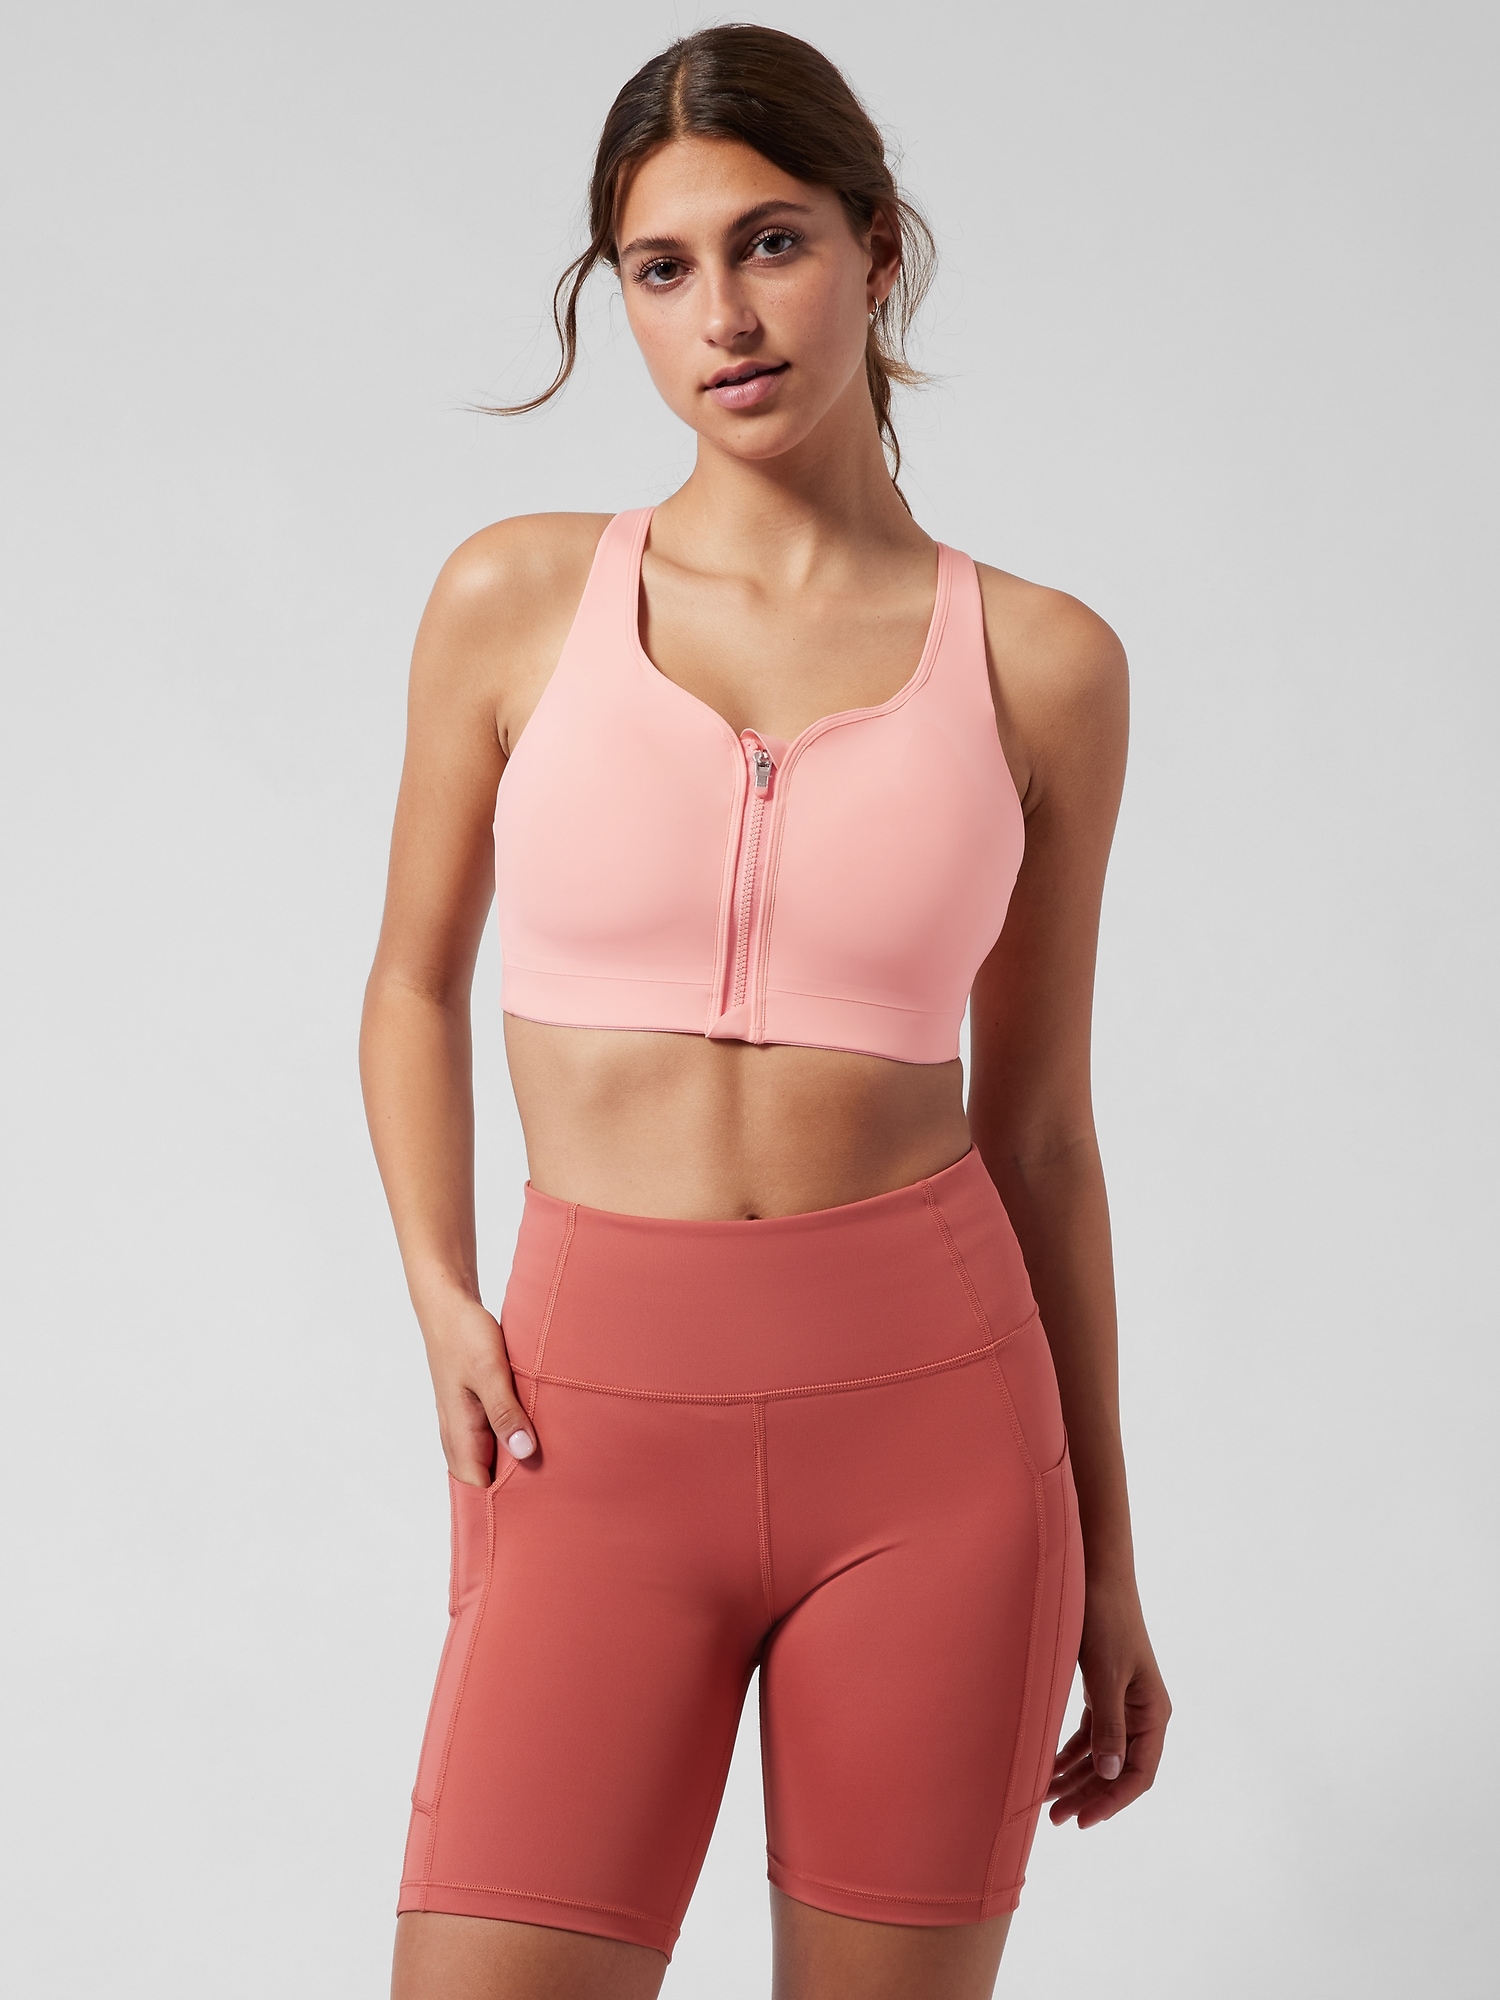 New Sale Styles Up to 60% Off at Athleta